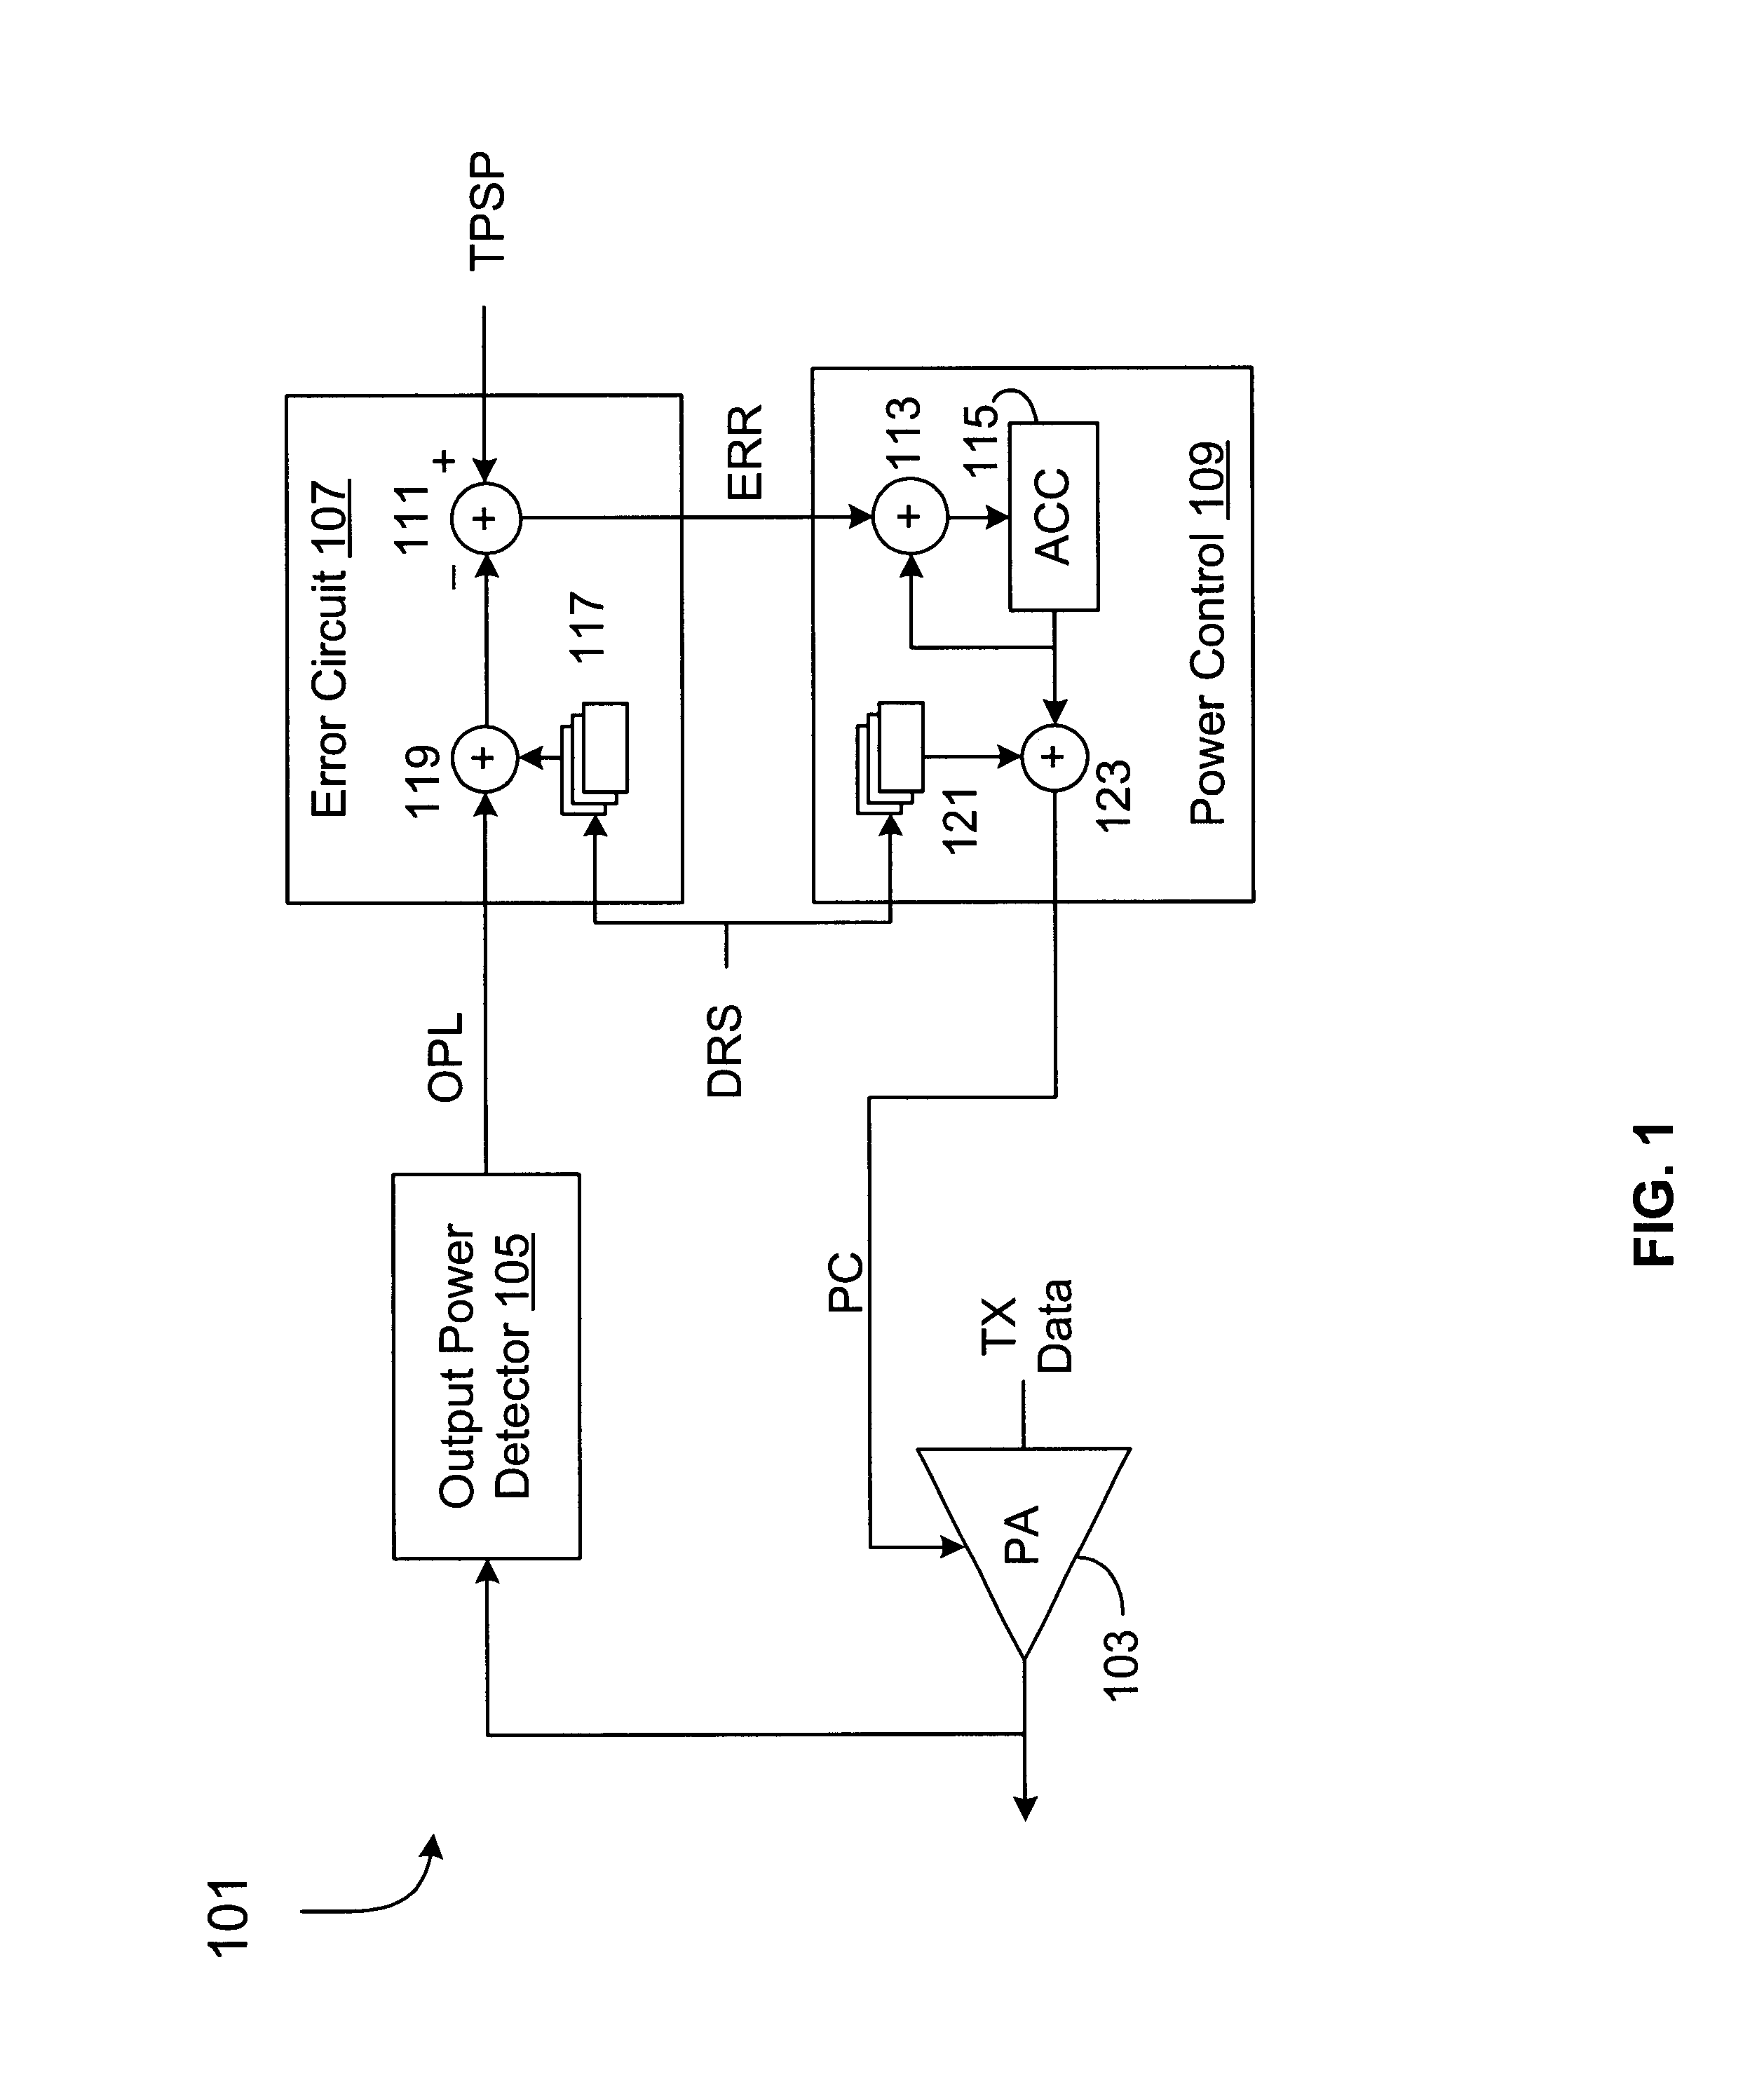 Transmit power control for multiple rate wireless communications